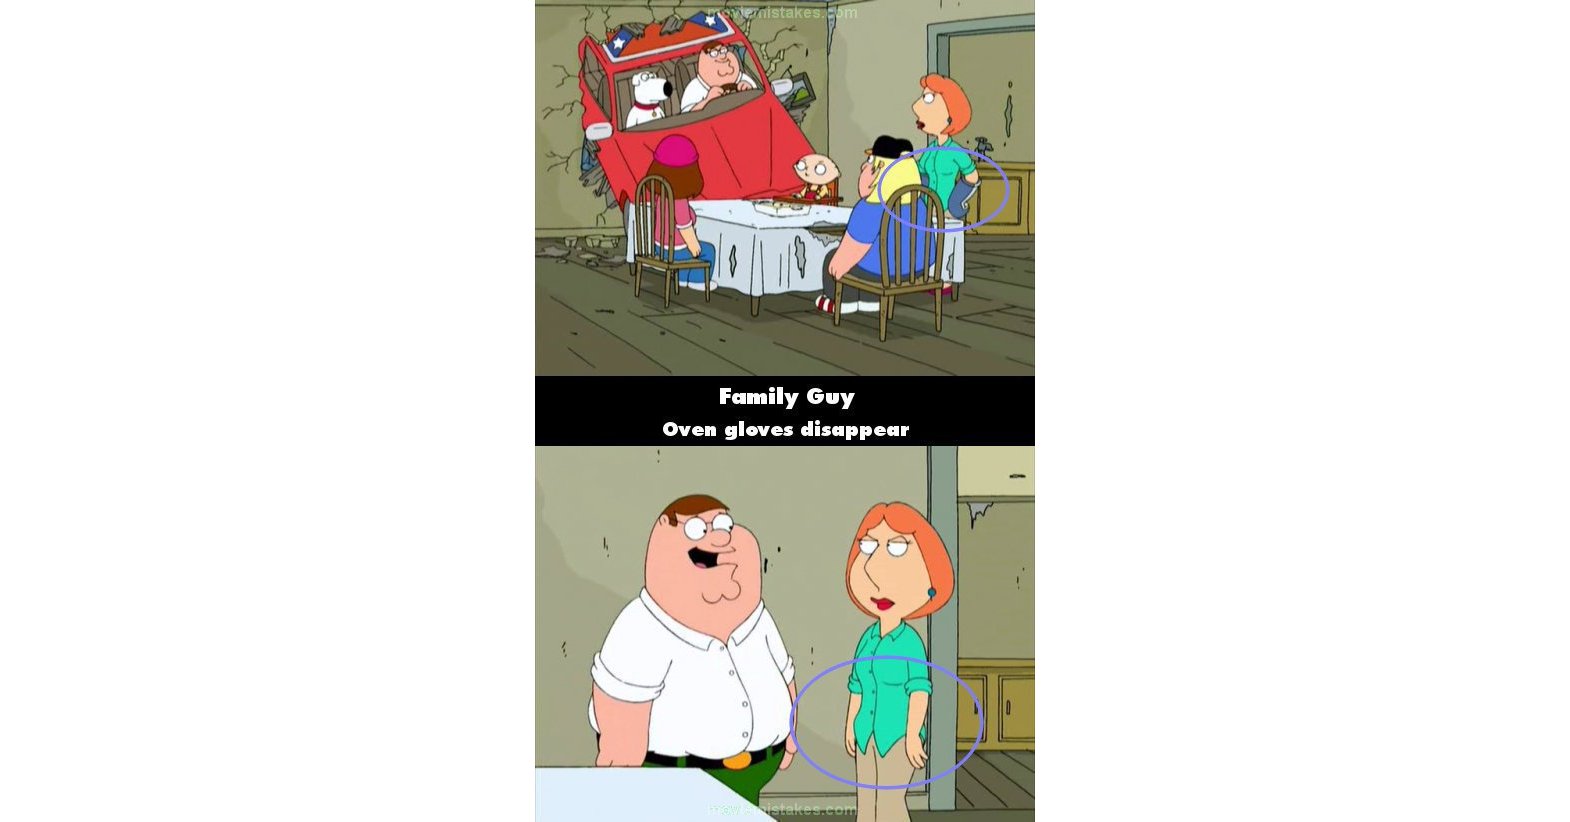 Family Guy (1999) TV mistake picture (ID 73288)